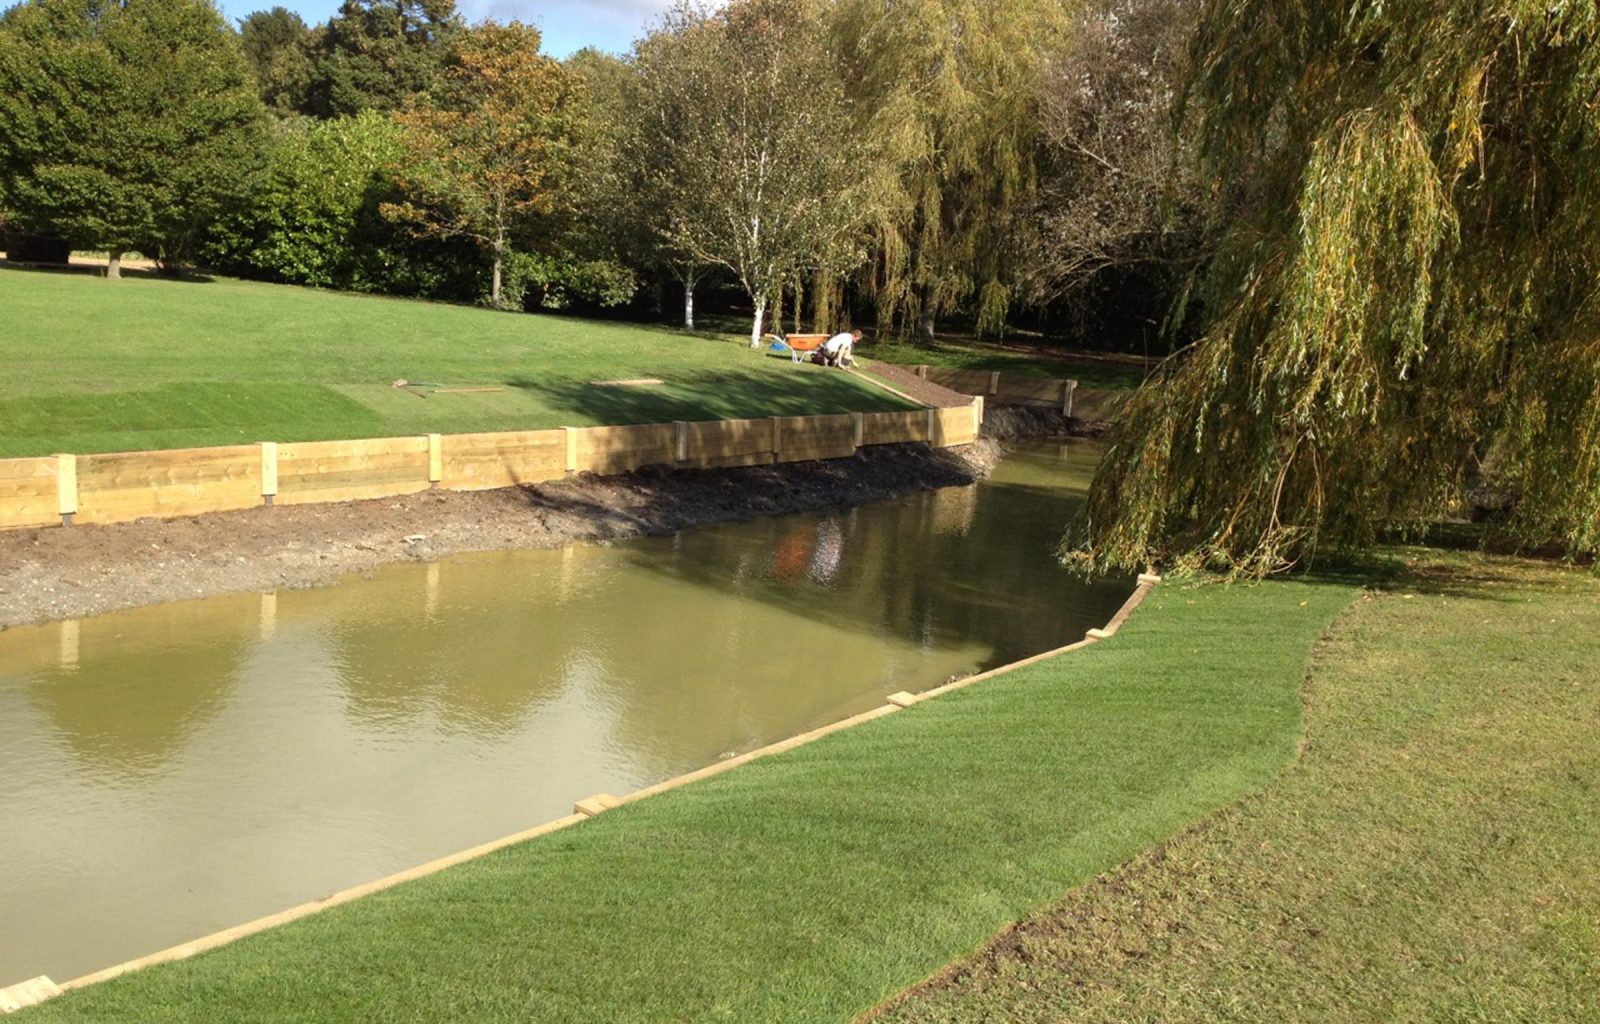 River landscaping with wooden revetments and timber bridge in a country garden in East Anglia. Own professional team carry out all landscaping and construction work. Please browse our website and blog to see more examples of our work.